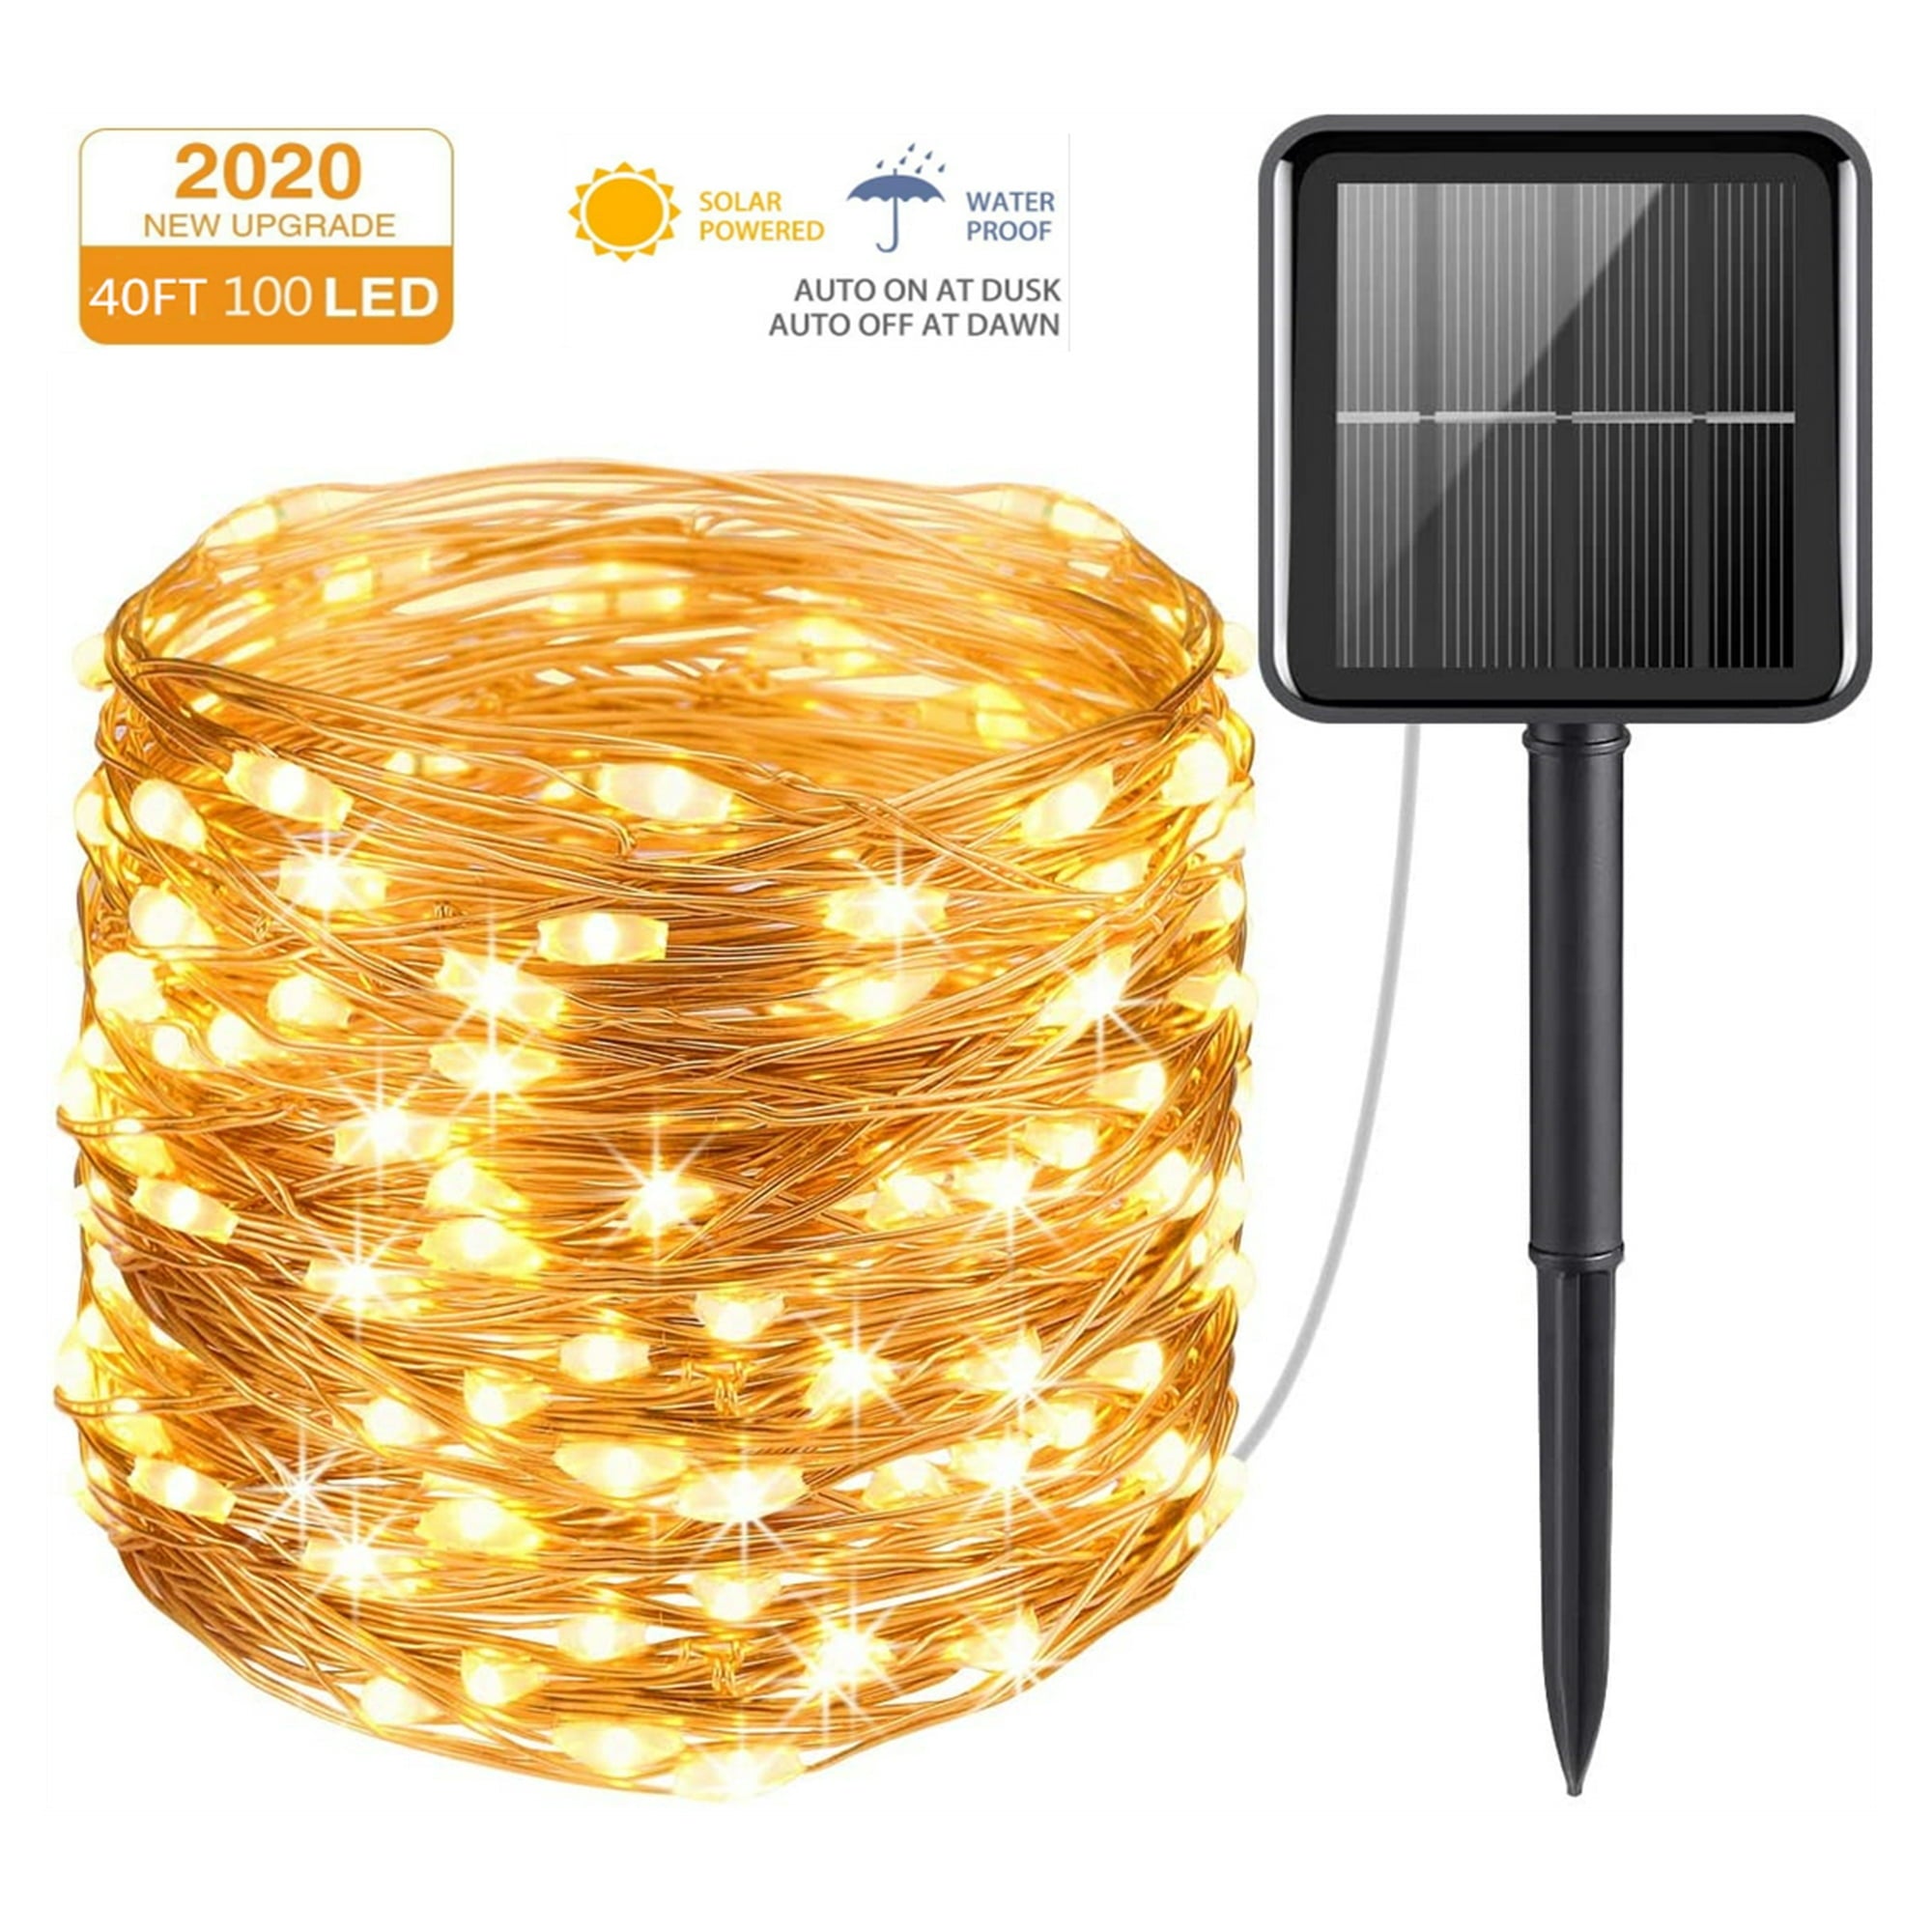 Outdoor Solar String Lights, 40ft 100 LED 8 Lighting Modes Copper Wire Solar Decorative Lights, Waterproof Solar Fairy Lights for Garden, Wedding, Patio, Bedroom, Party, Bushes, Trees and Christmas